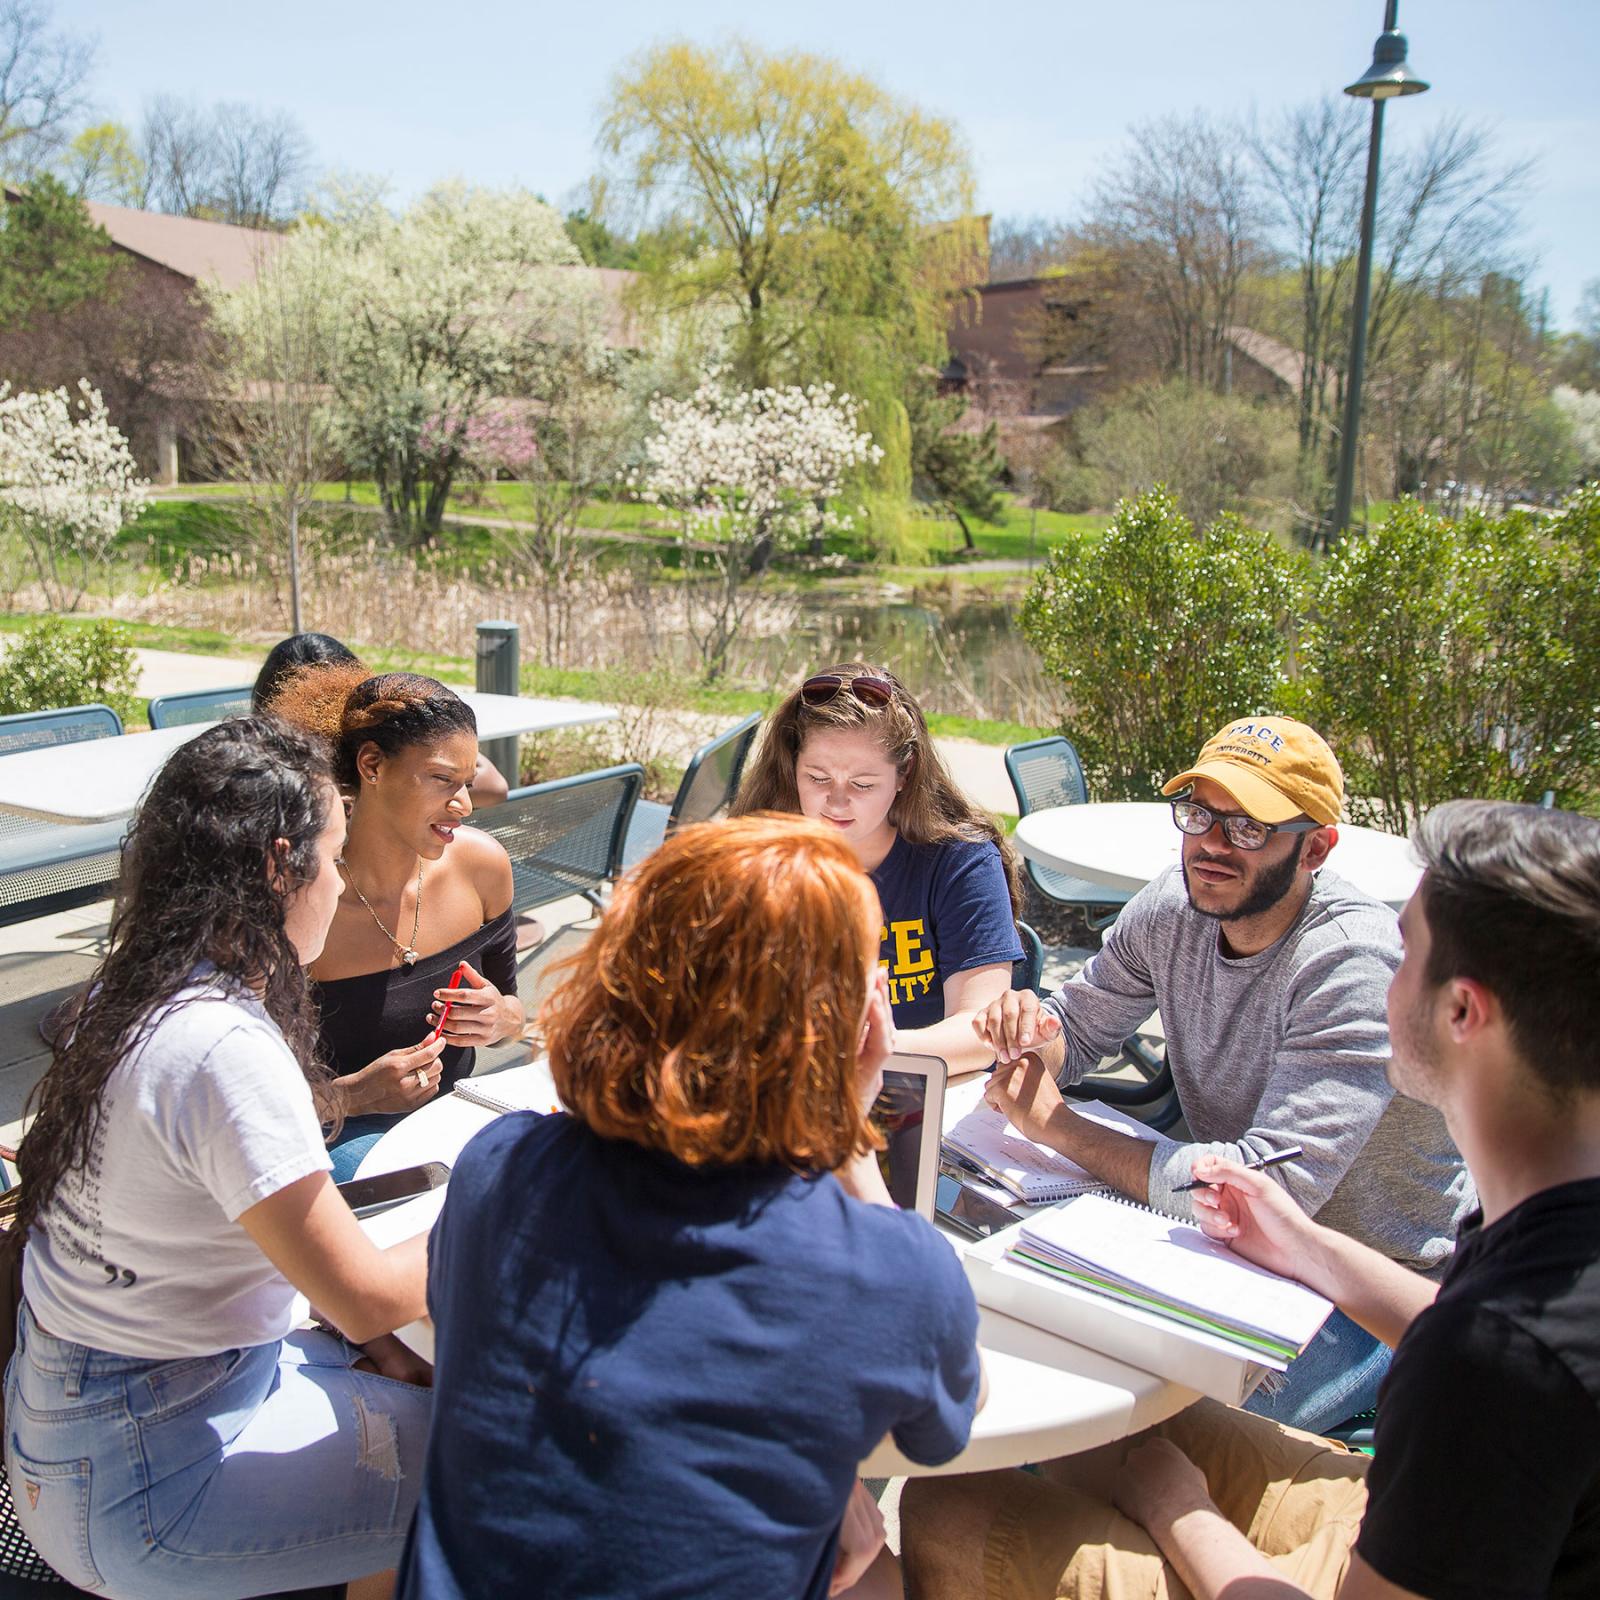 Students enjoying a sunny day and studying together at the Westchester campus.